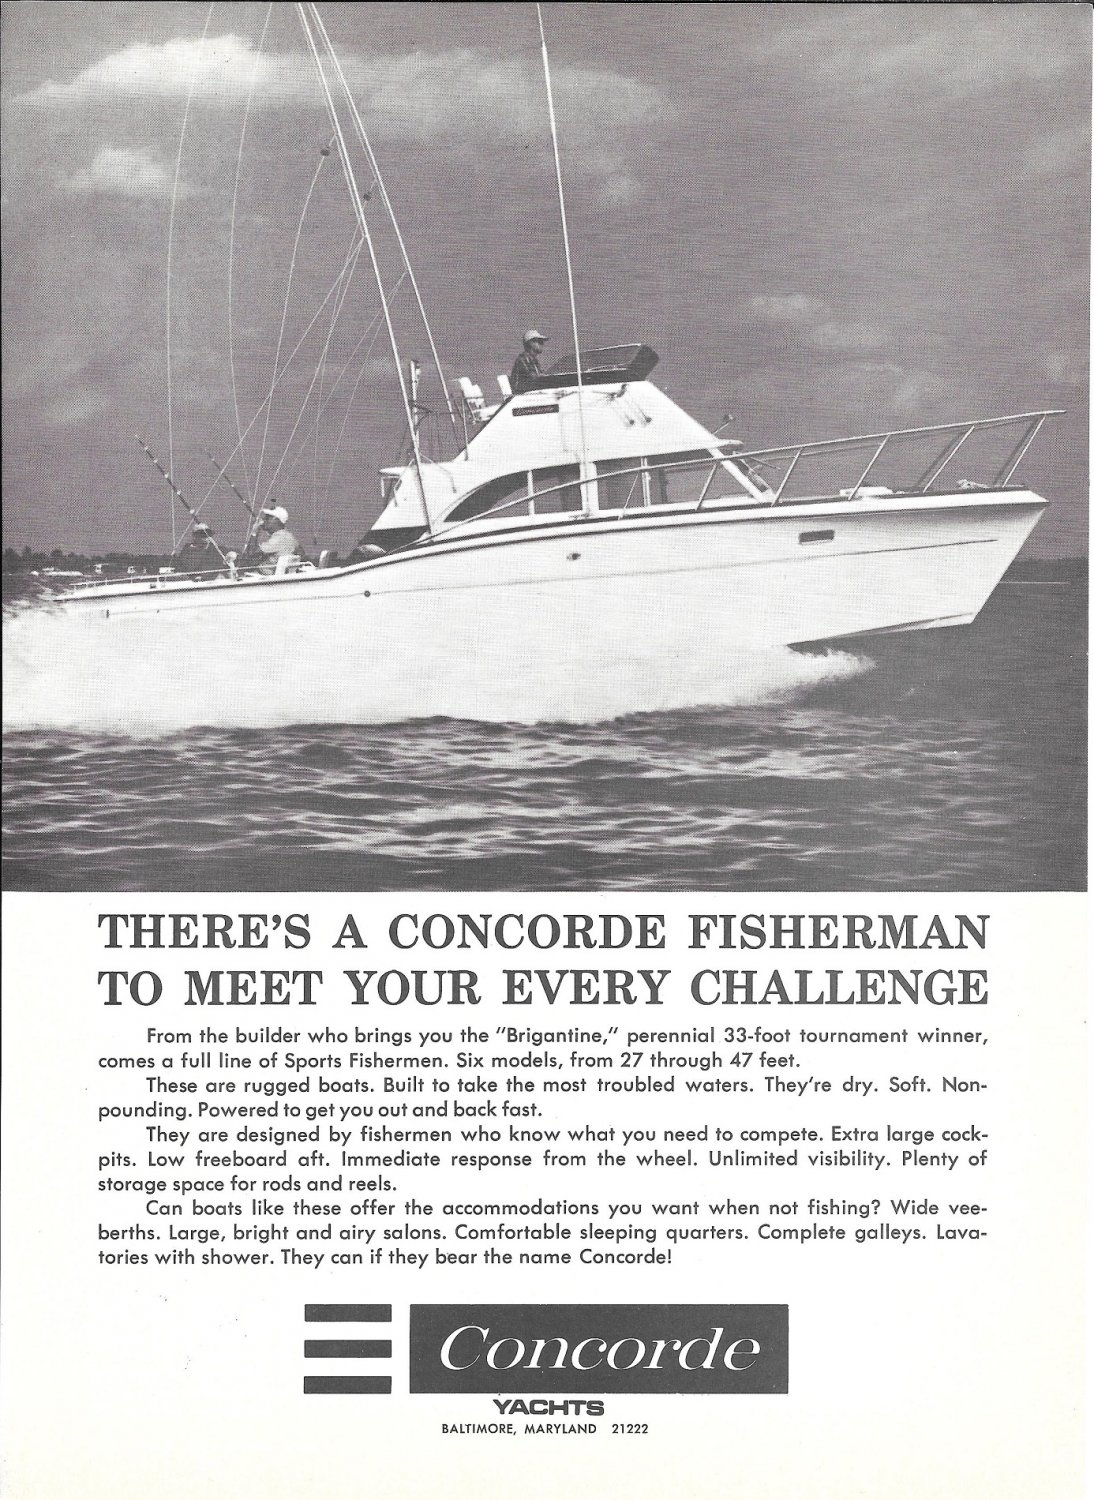 Old 1971 Concorde Yacht Ad- Nice Photo